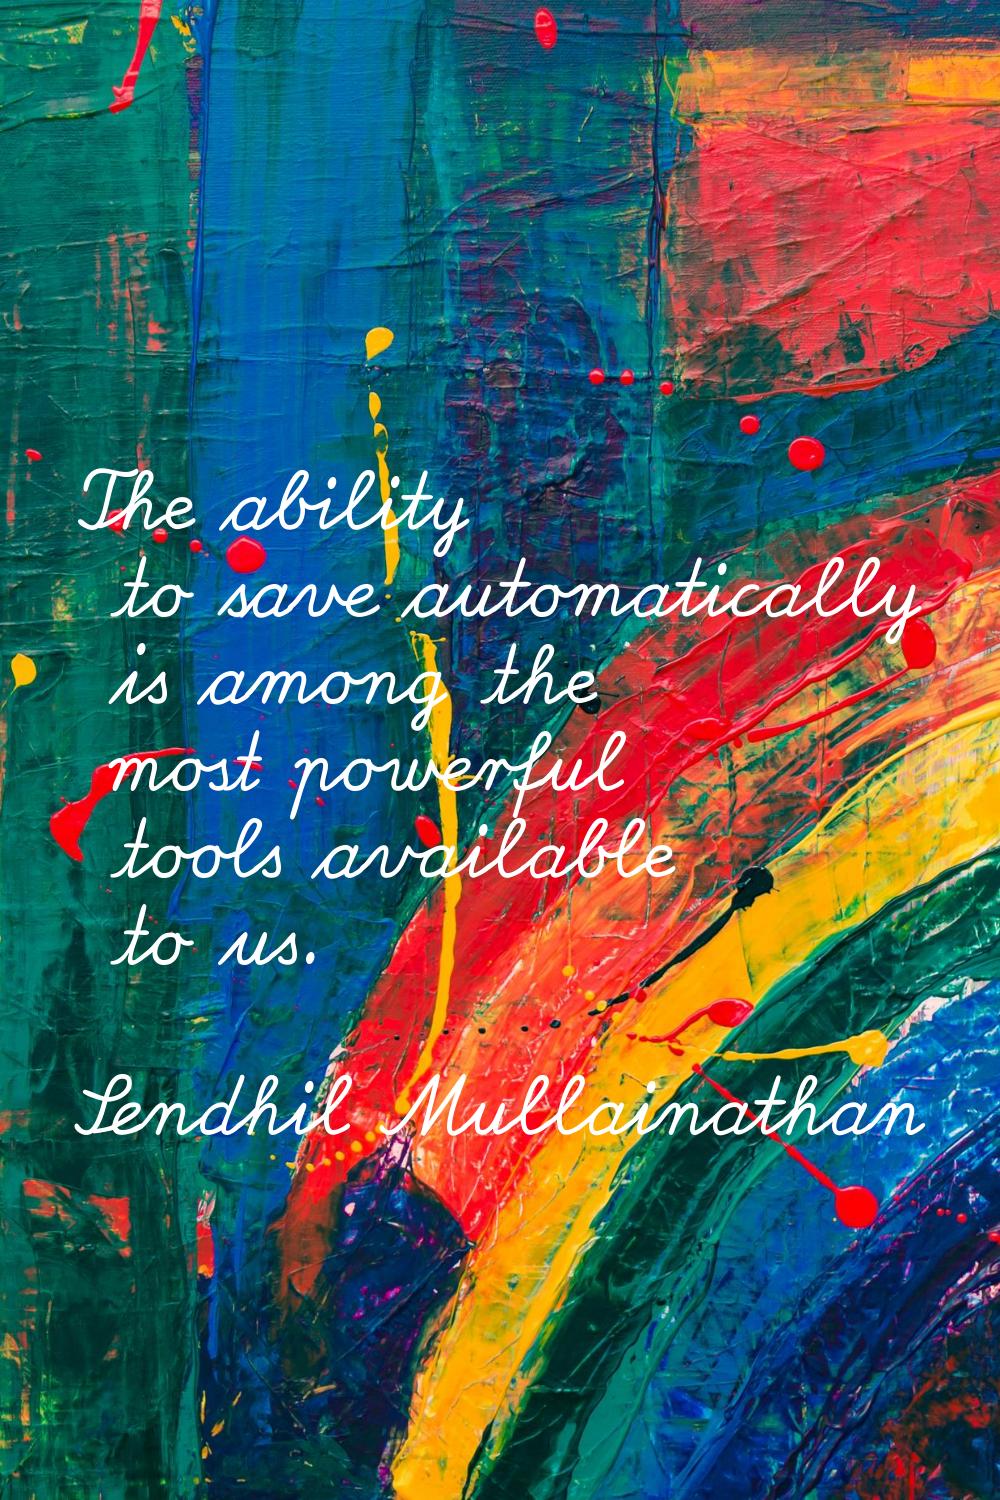 The ability to save automatically is among the most powerful tools available to us.